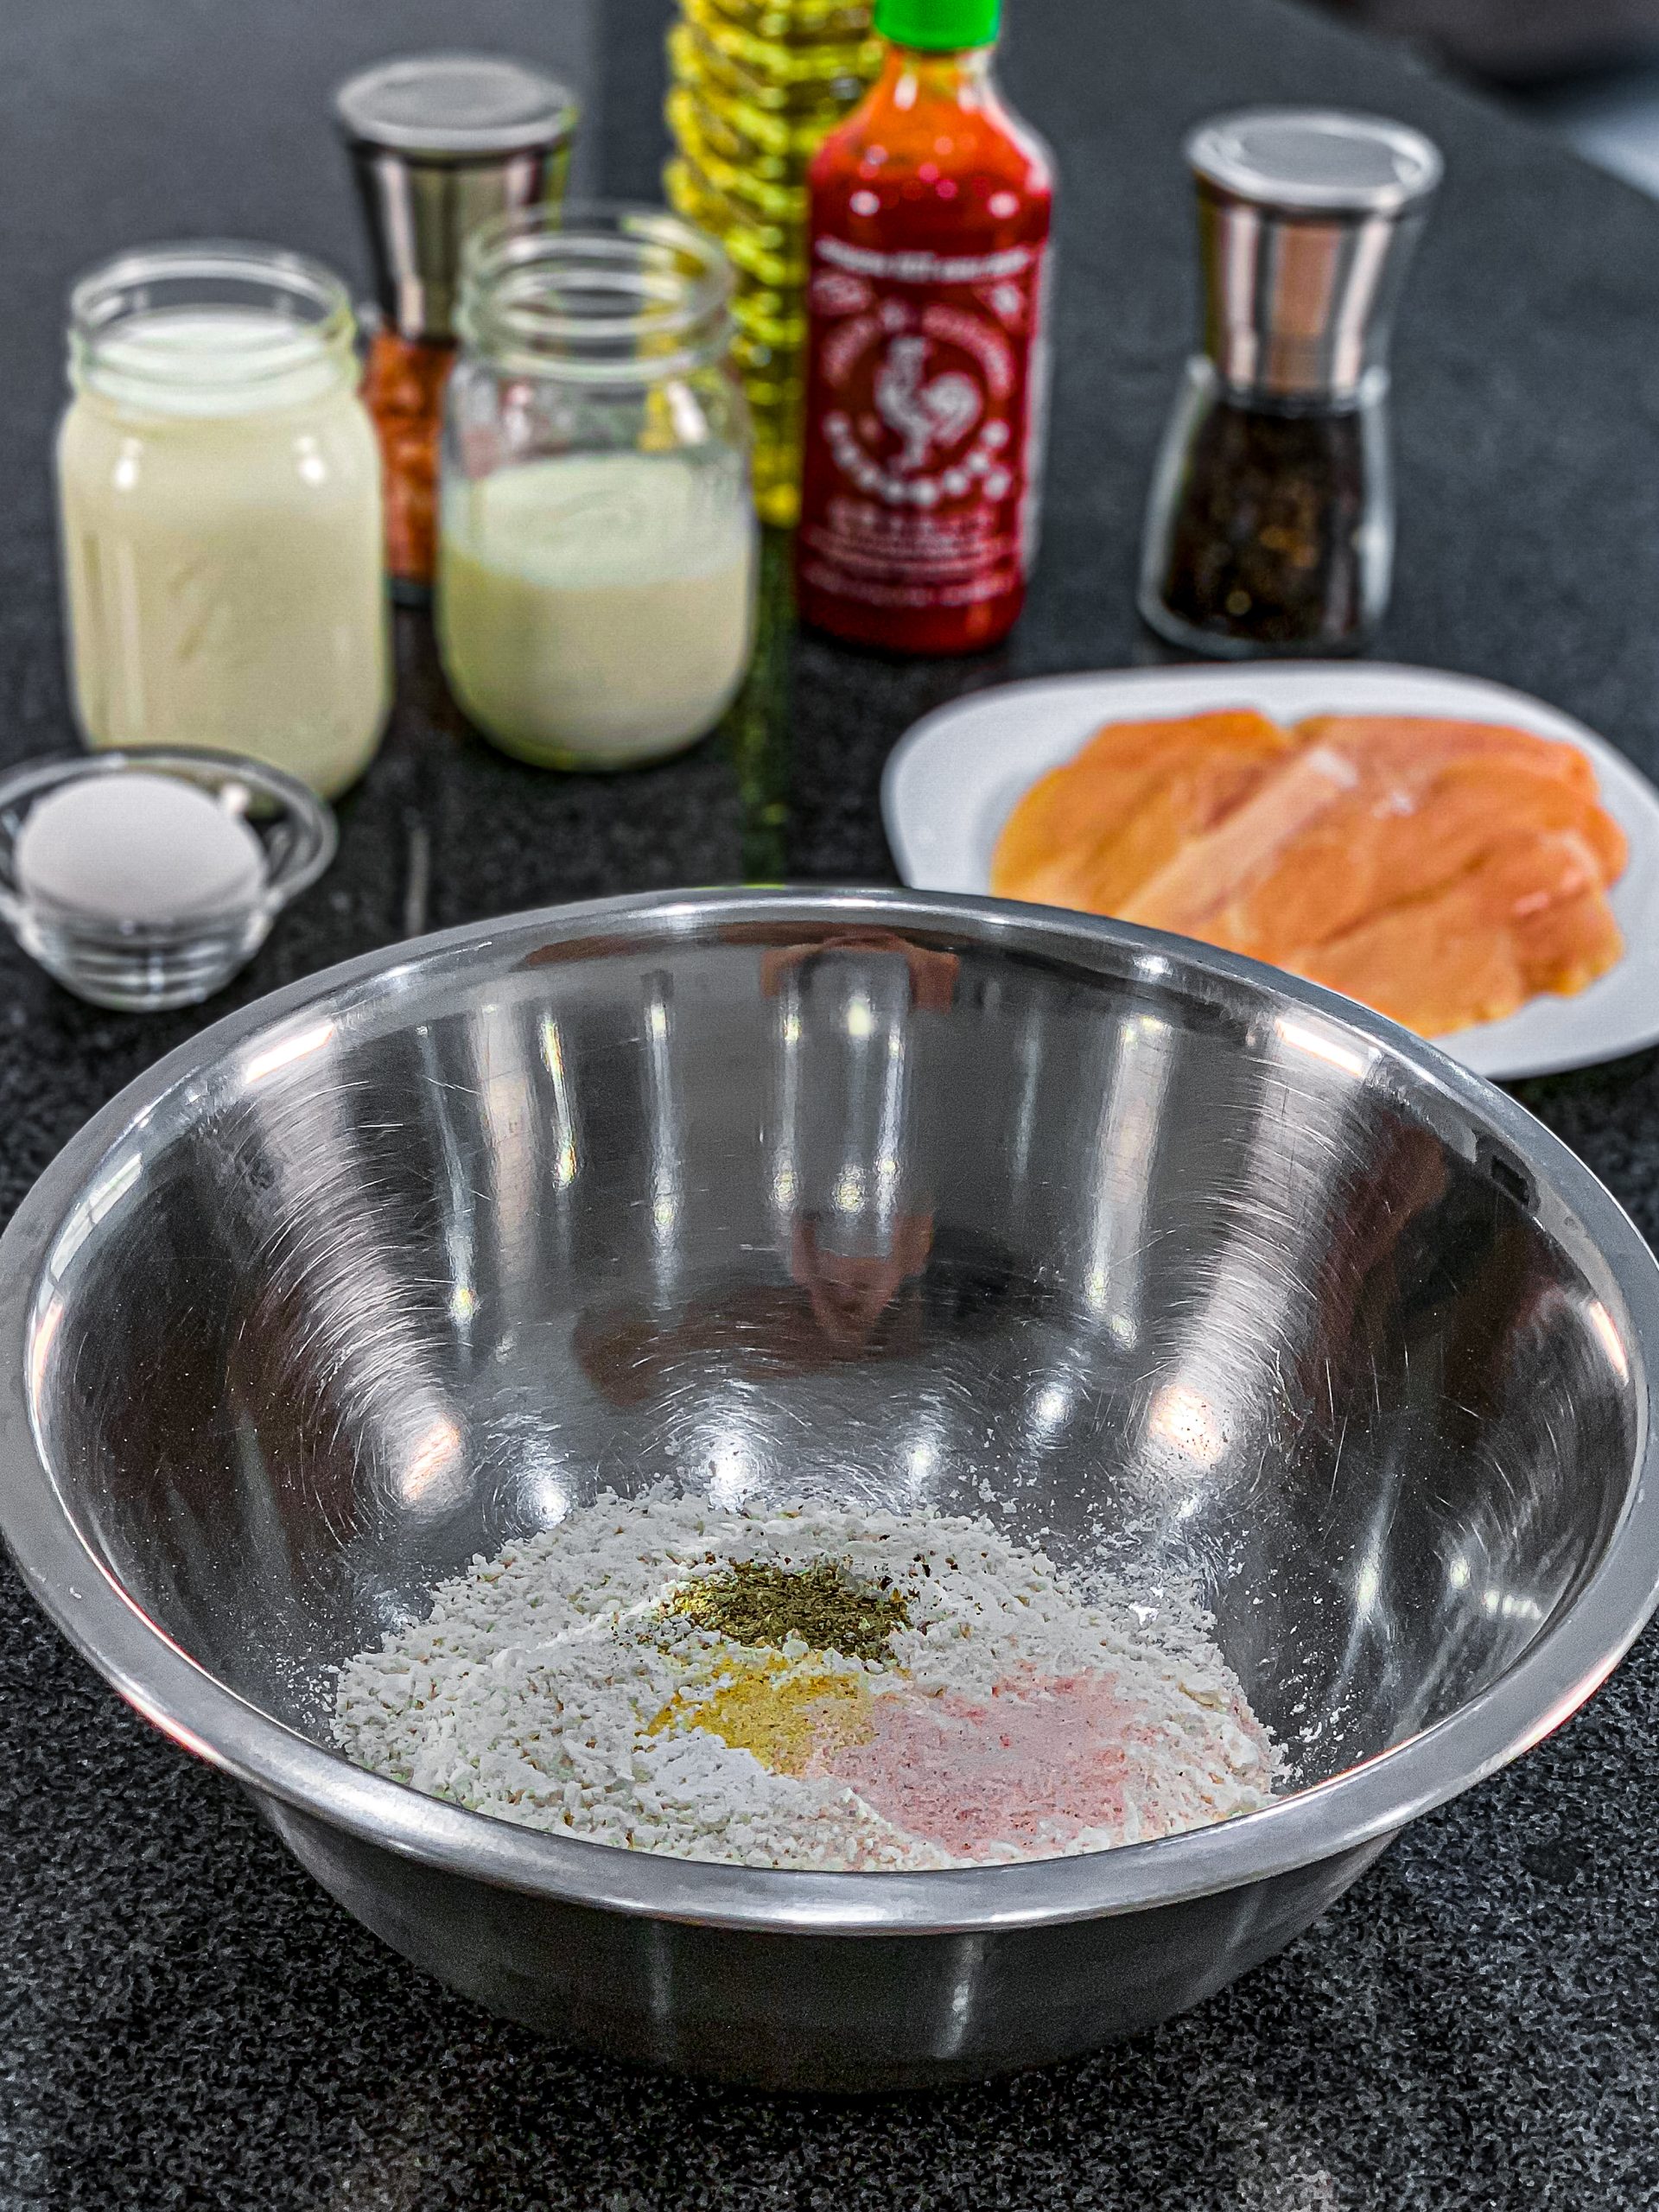  In a large or shallow mixing bowl add the flour, baking powder, baking soda, garlic powder, salt, and pepper. Whisk together until well combined.